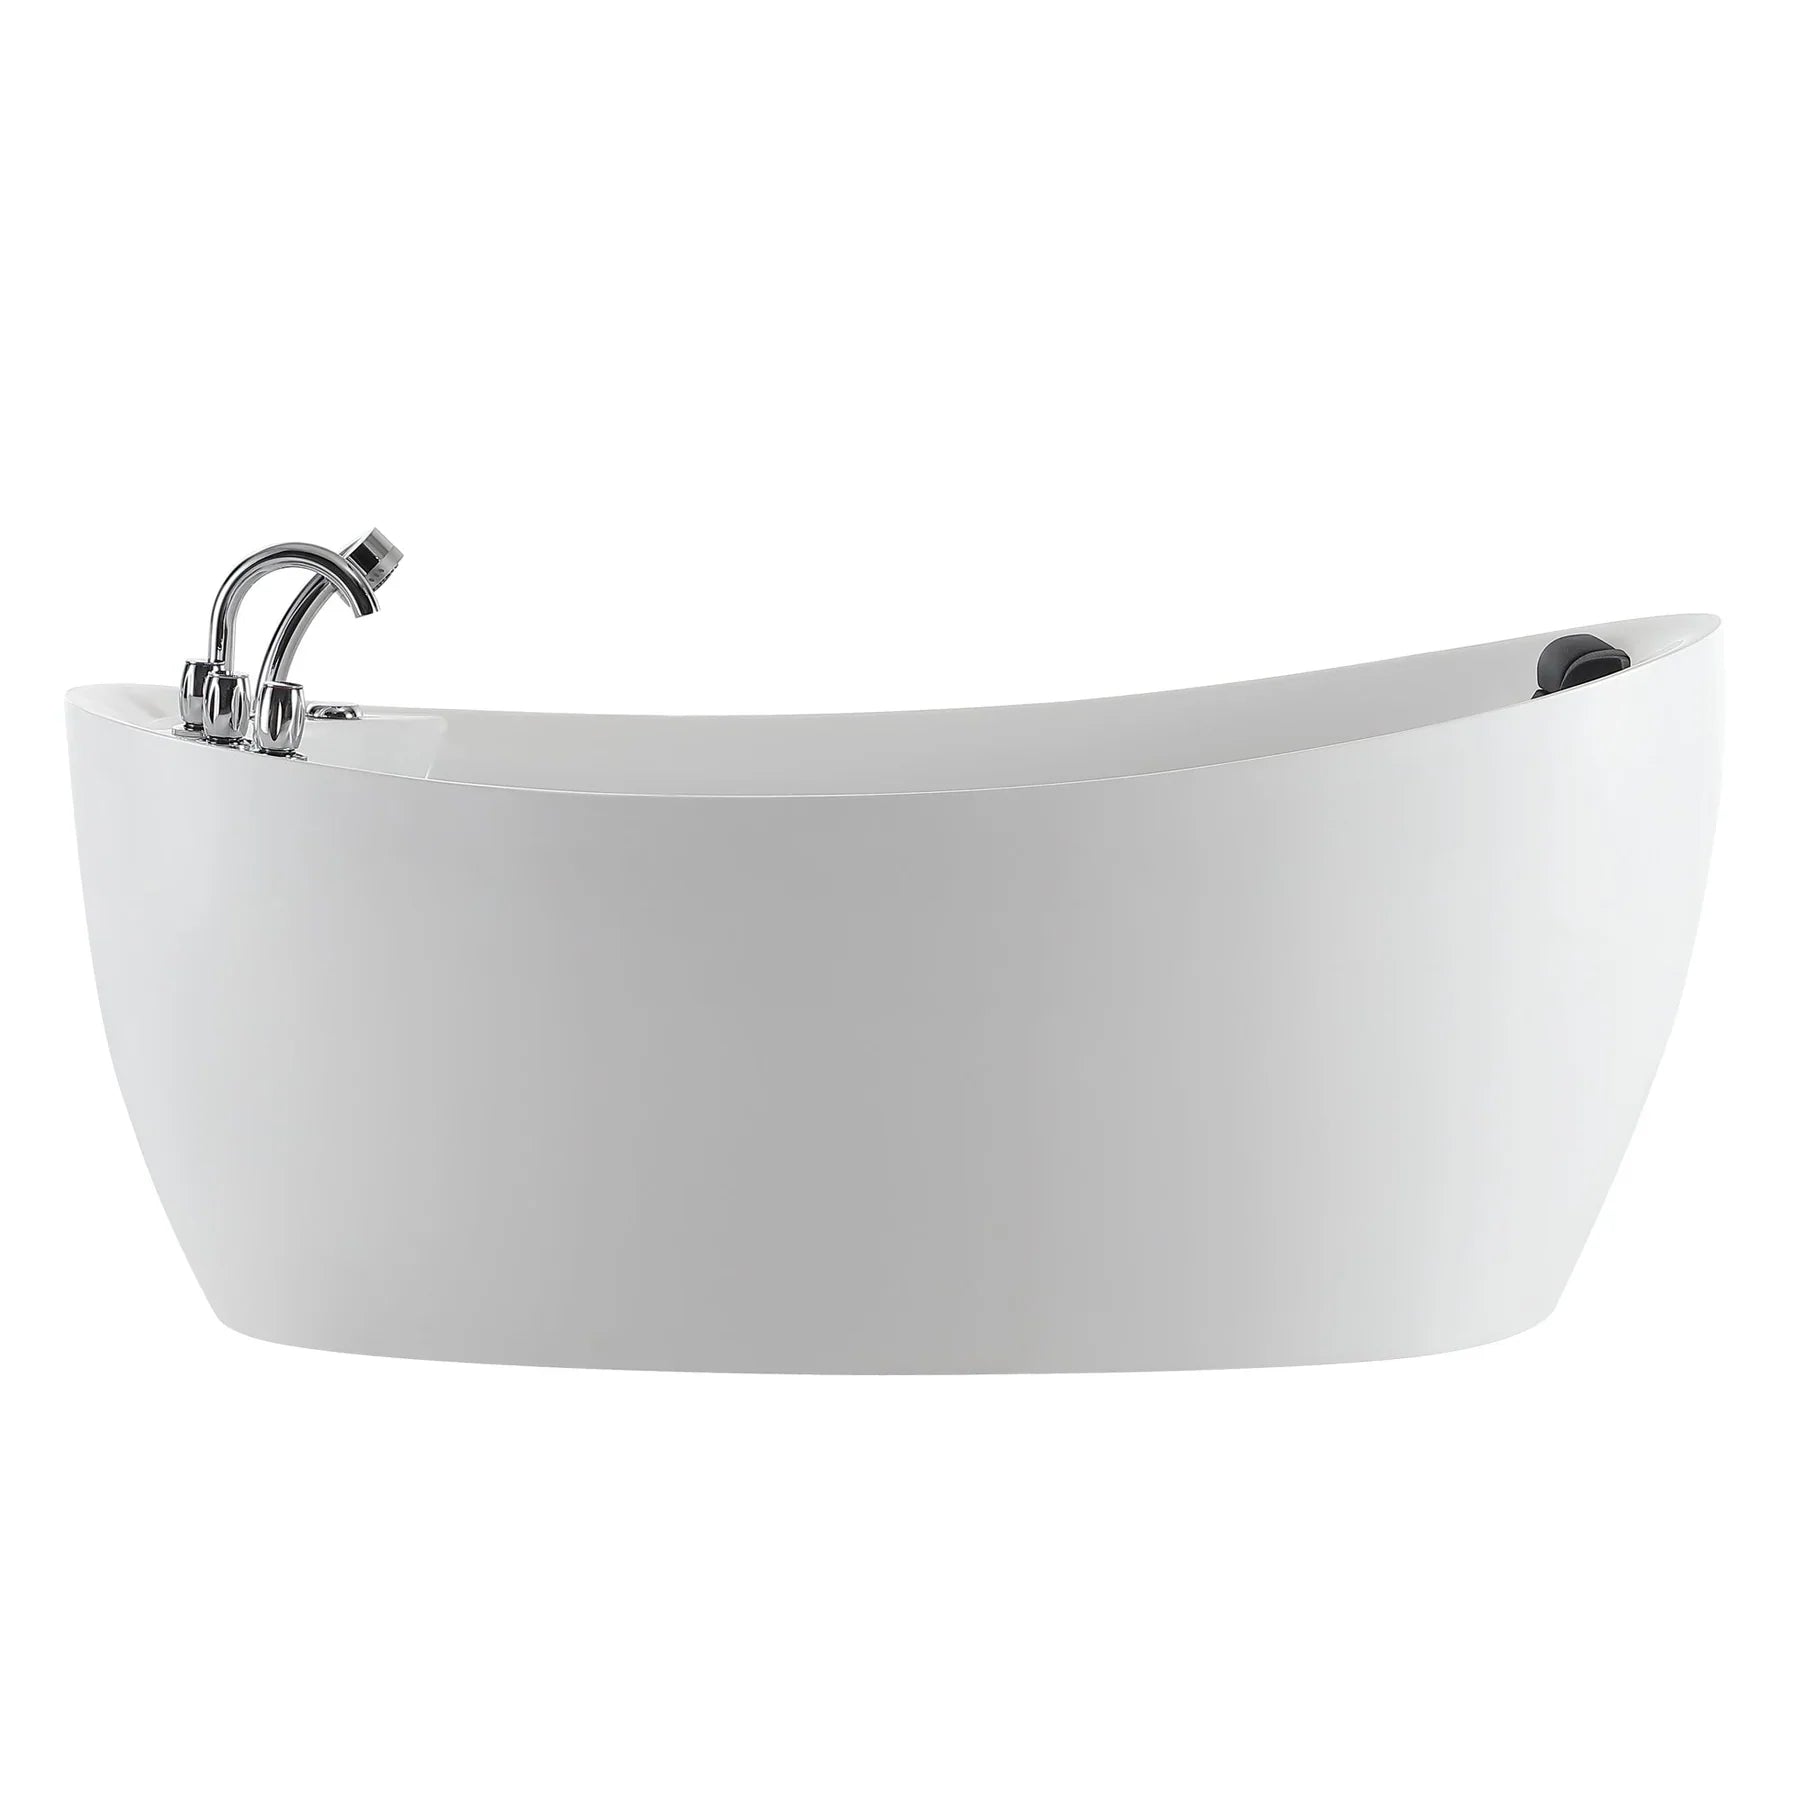 Empava 67 in. Freestanding Jetted Bathtub in White Acrylic (67AIS02)